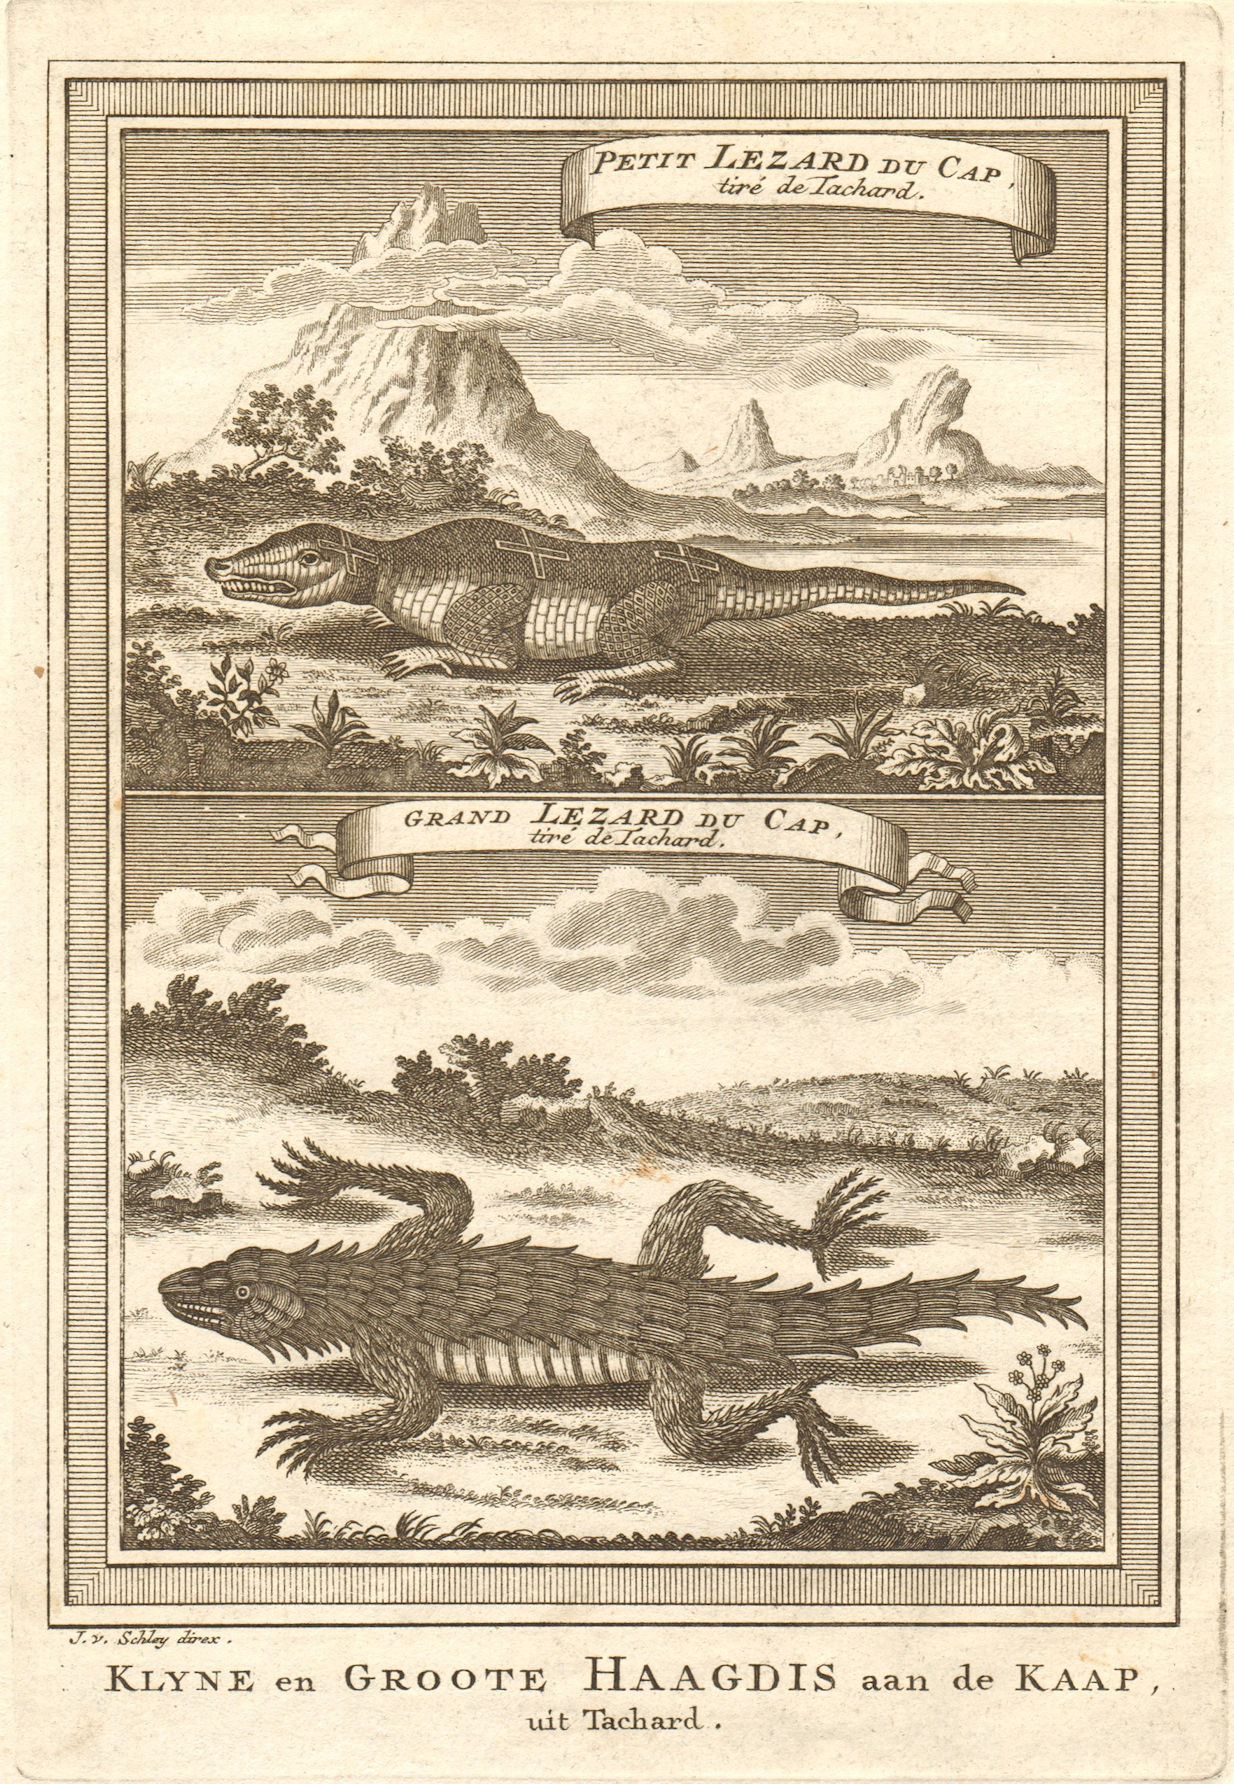 Associate Product South Africa. Small Cape Lizard & Great Cape Lizard, from Tachard. SCHLEY 1748